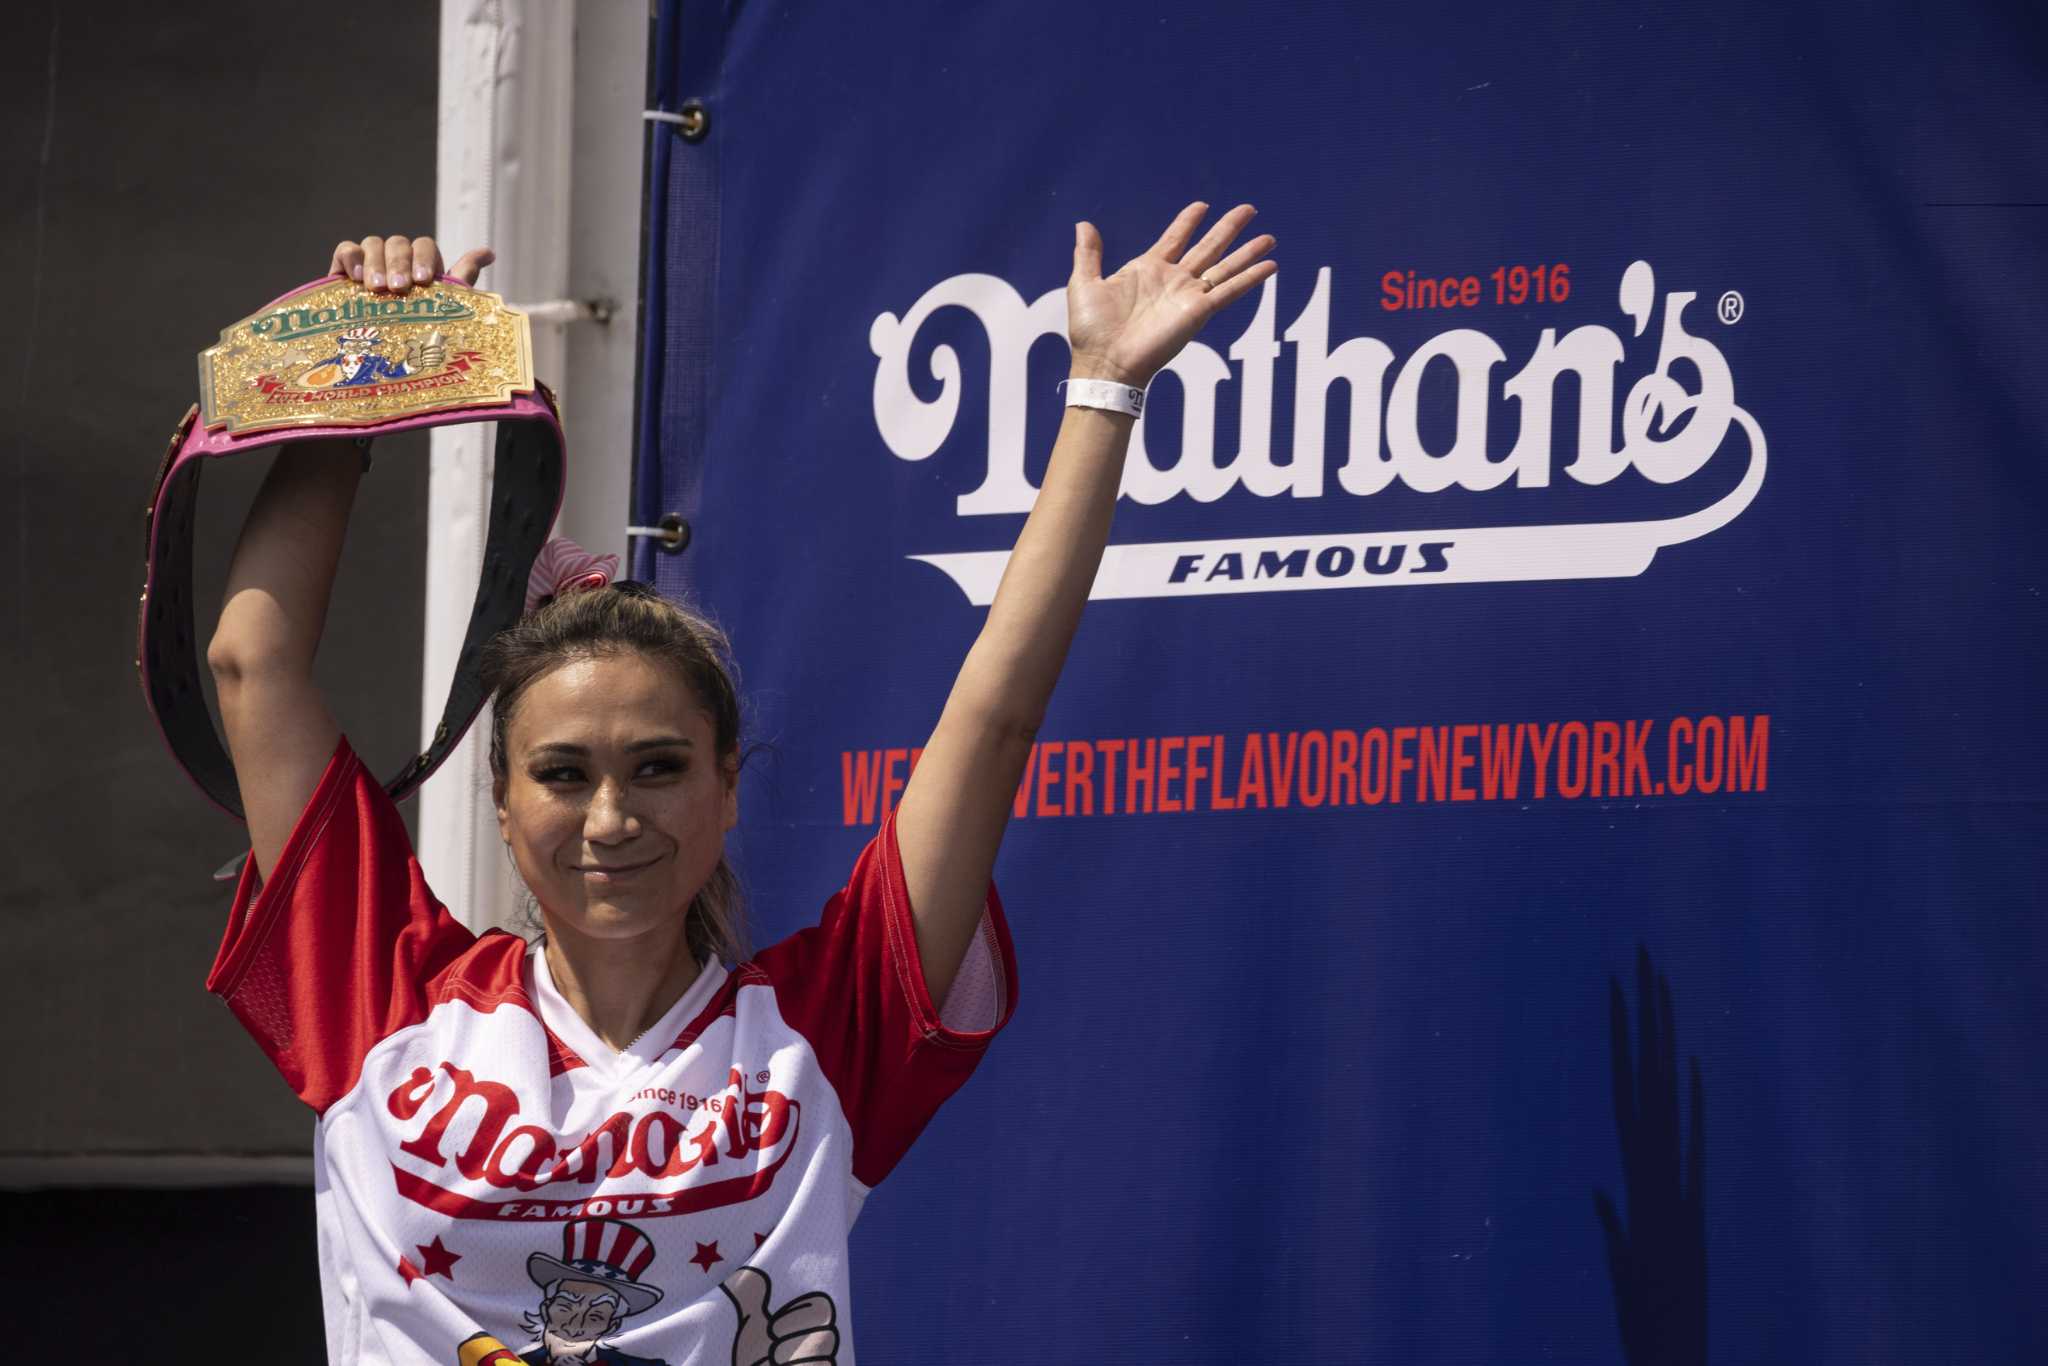 Former CT resident wins women's Nathan's Hot Dog Eating Contest